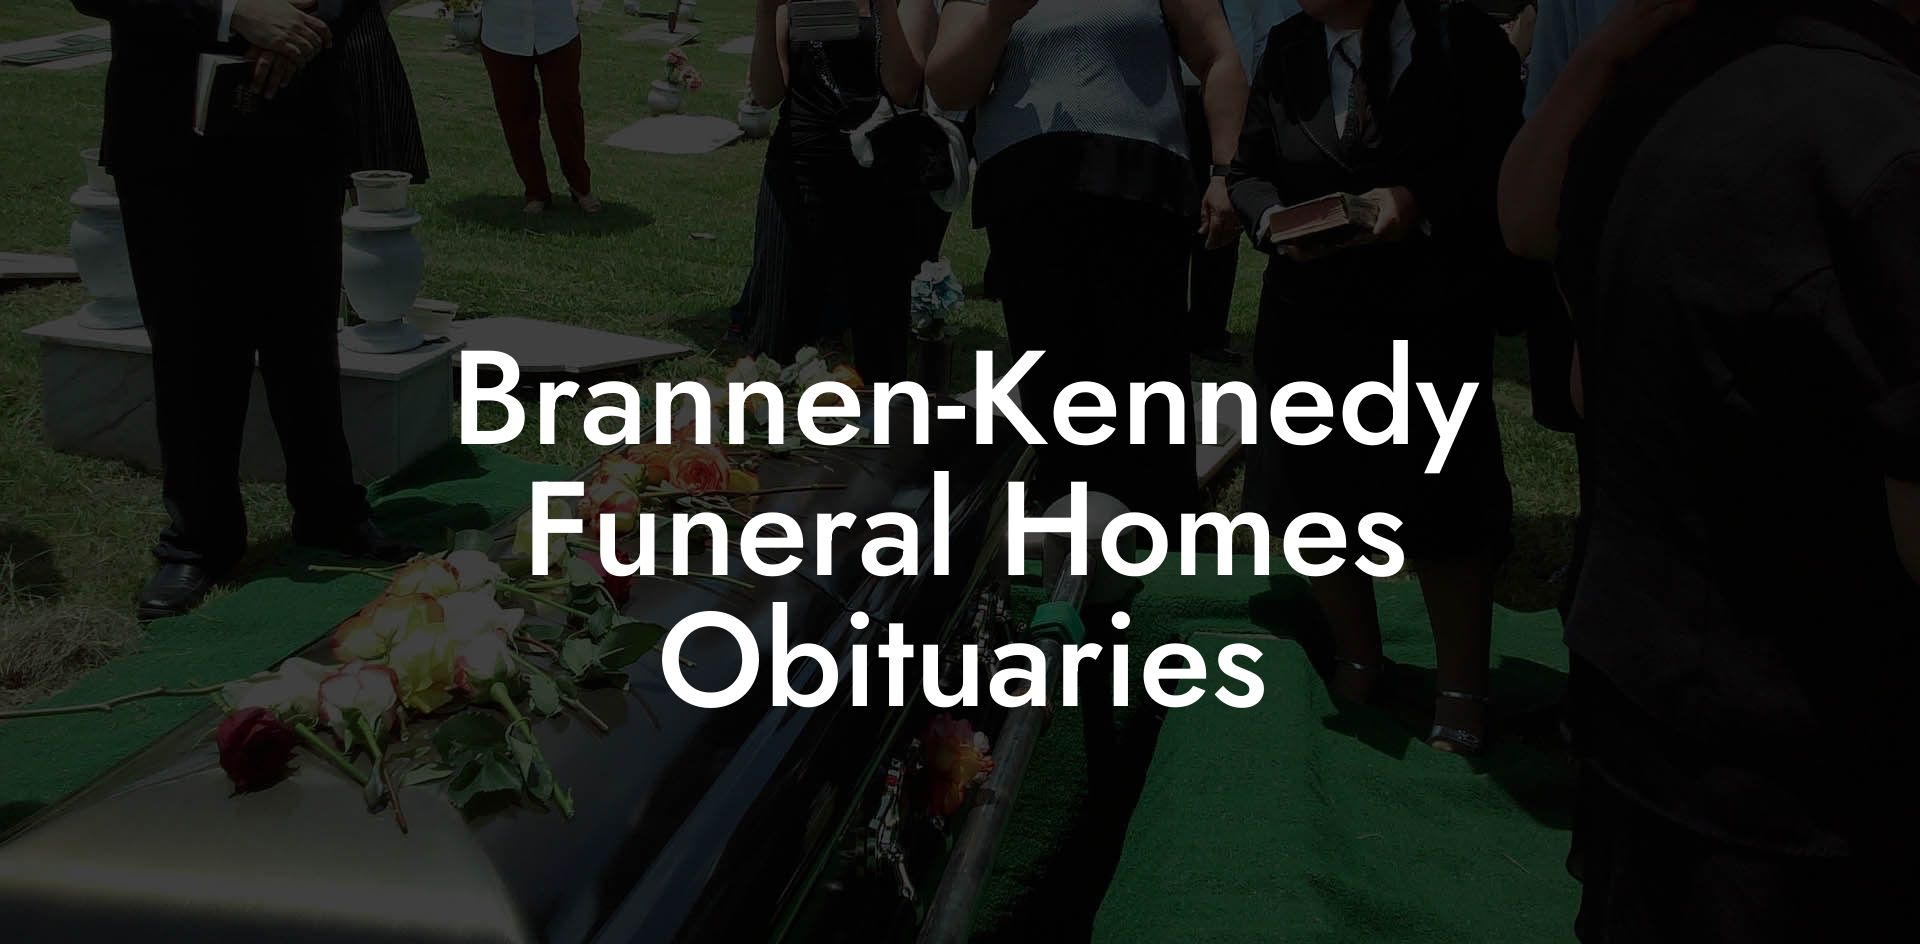 Brannen-Kennedy Funeral Homes Obituaries